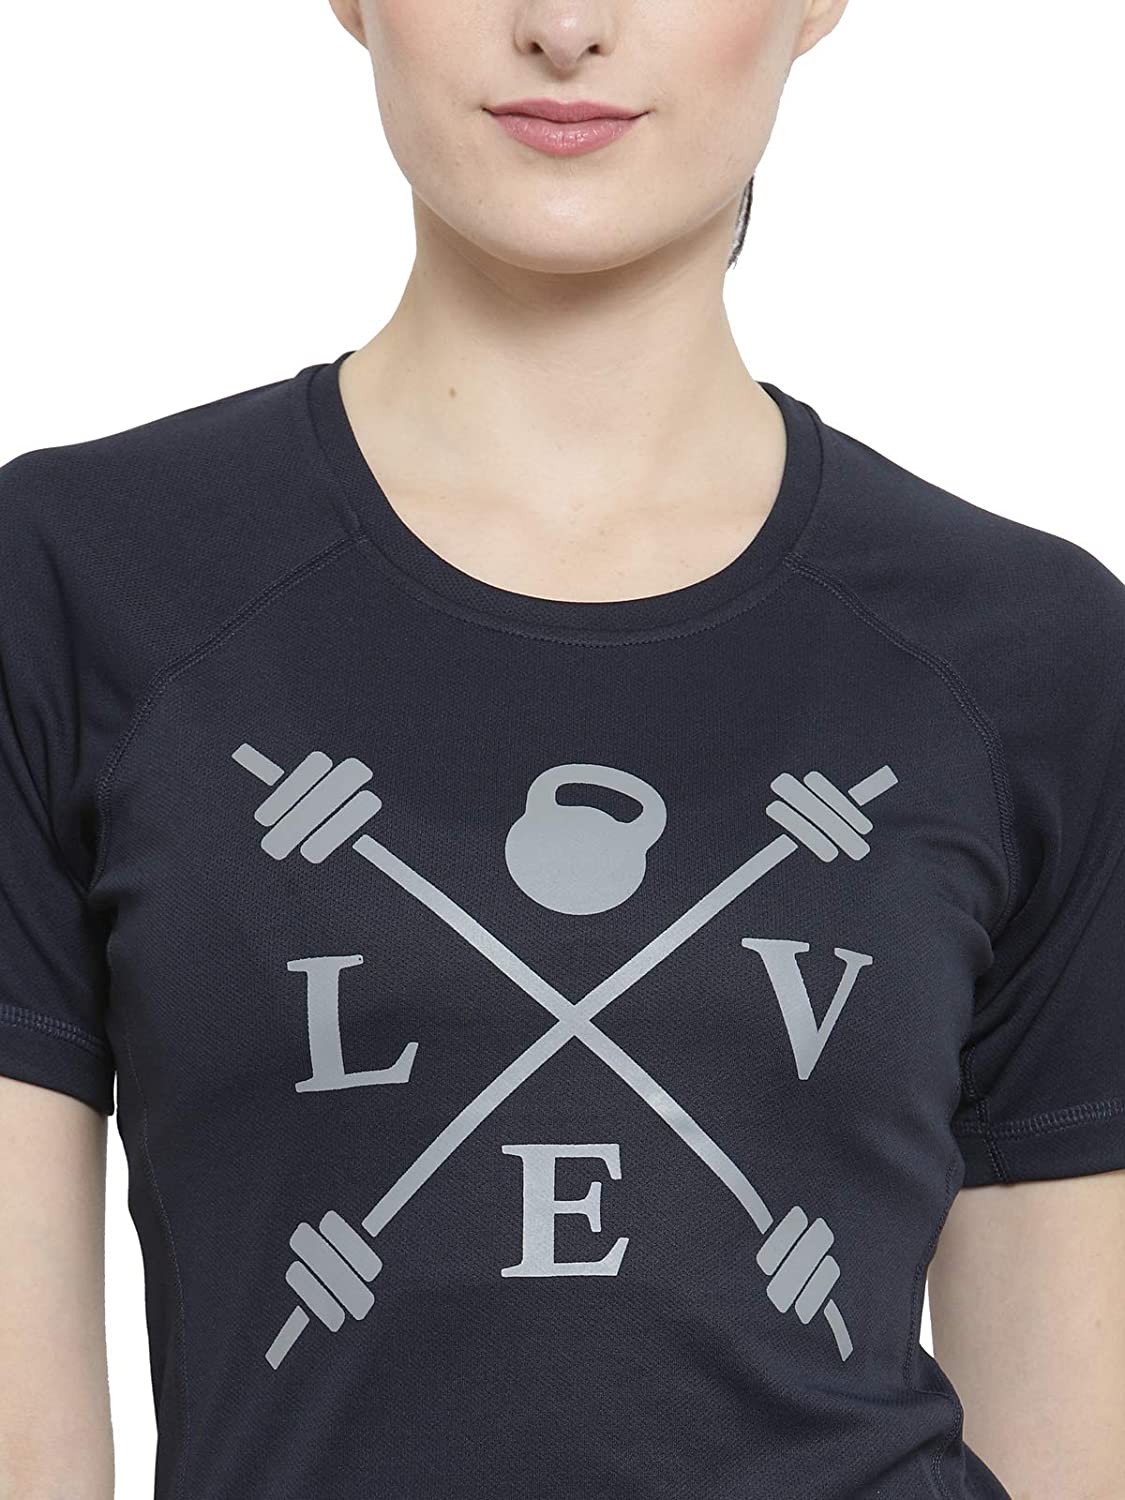 Invincible Women’s Gym Love Round Neck Workout T-Shirt